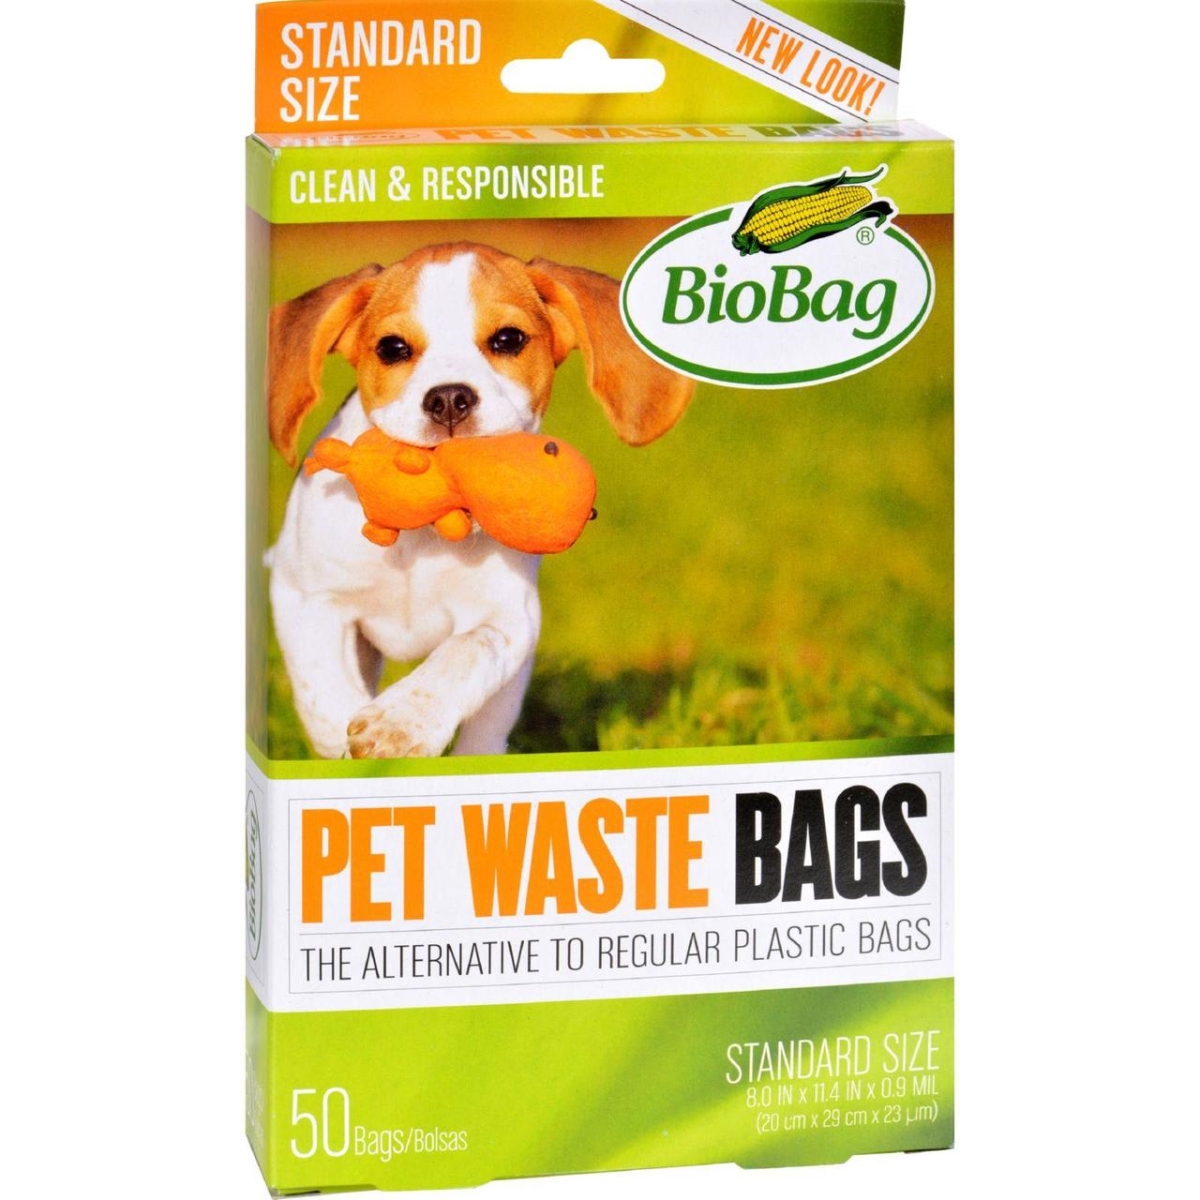 Hg0541797 Dog Waste Bags - 50 Count, Case Of 12